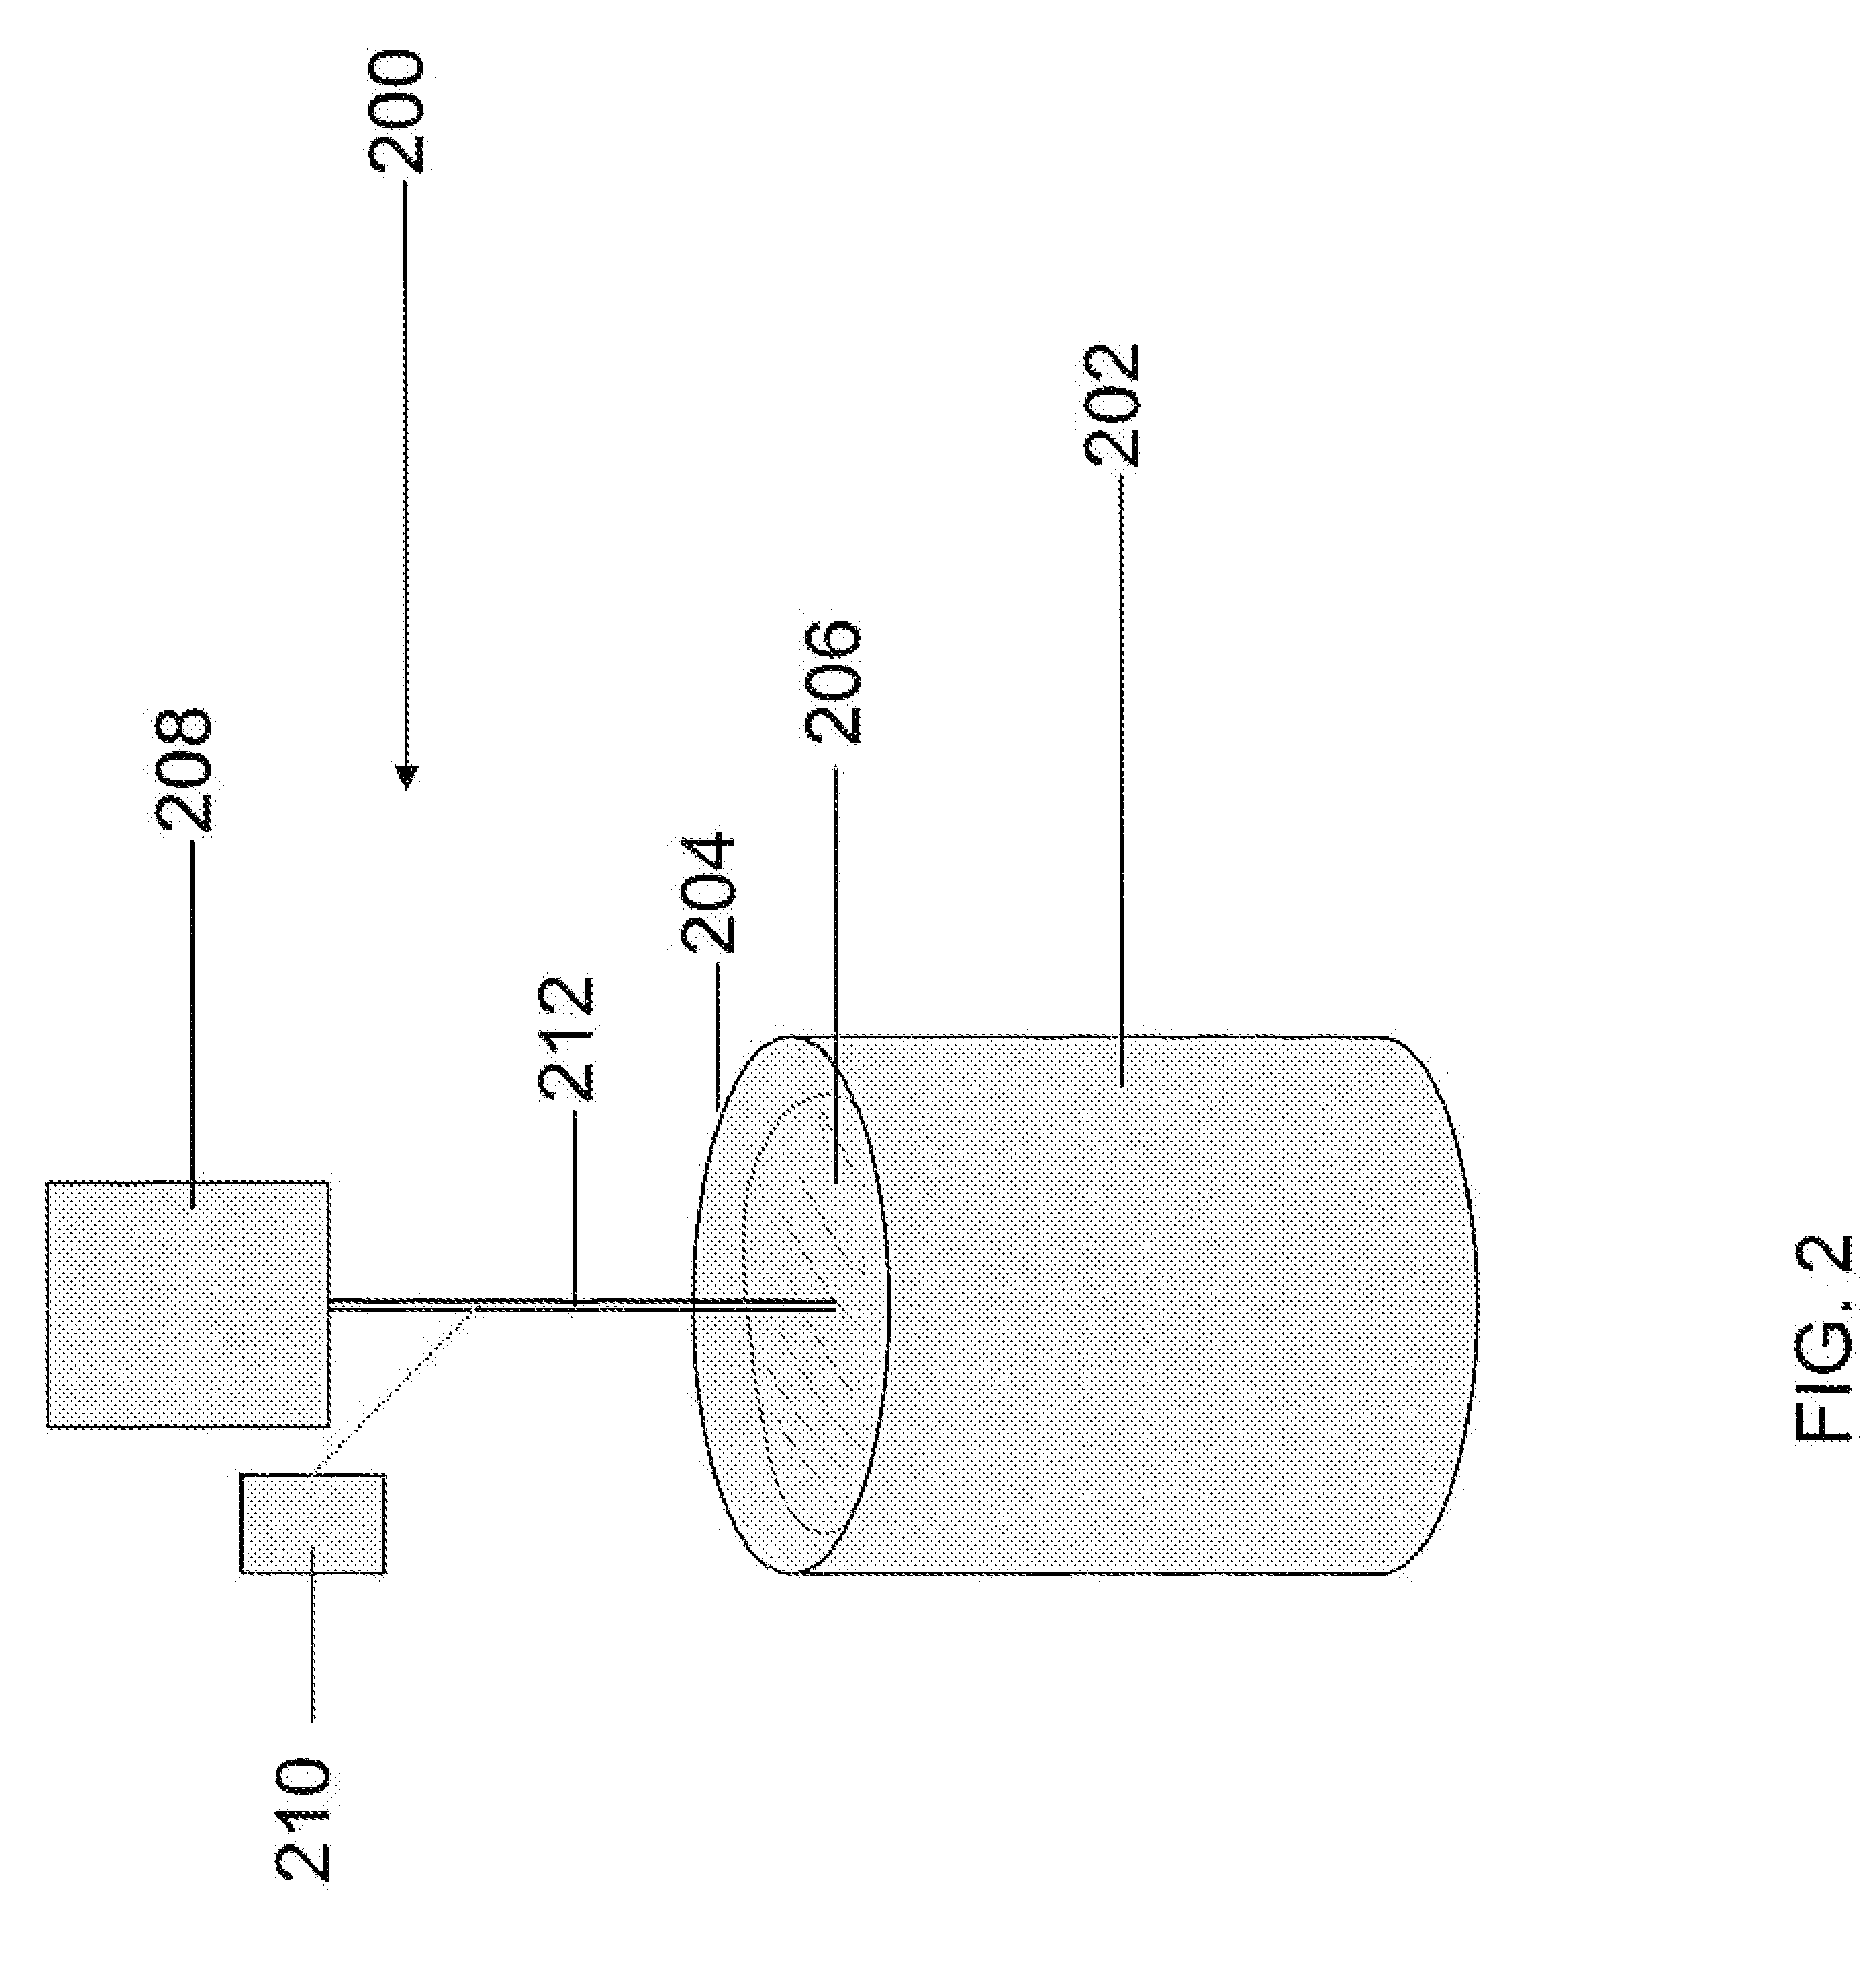 Method of manufacturing and testing monofilament and multi-filaments self-retaining sutures